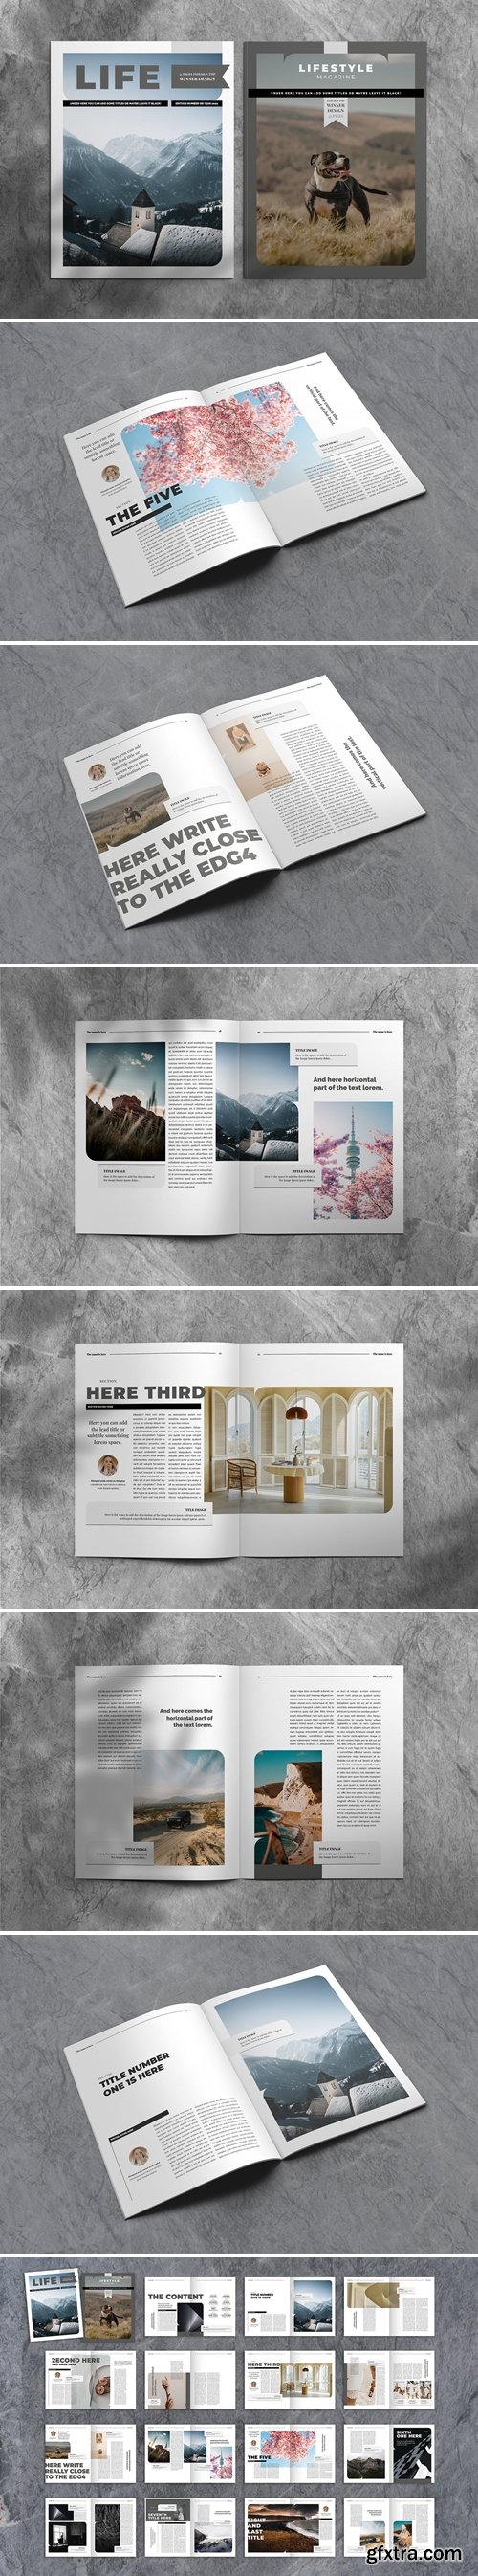 Lifestyle Indesign Template